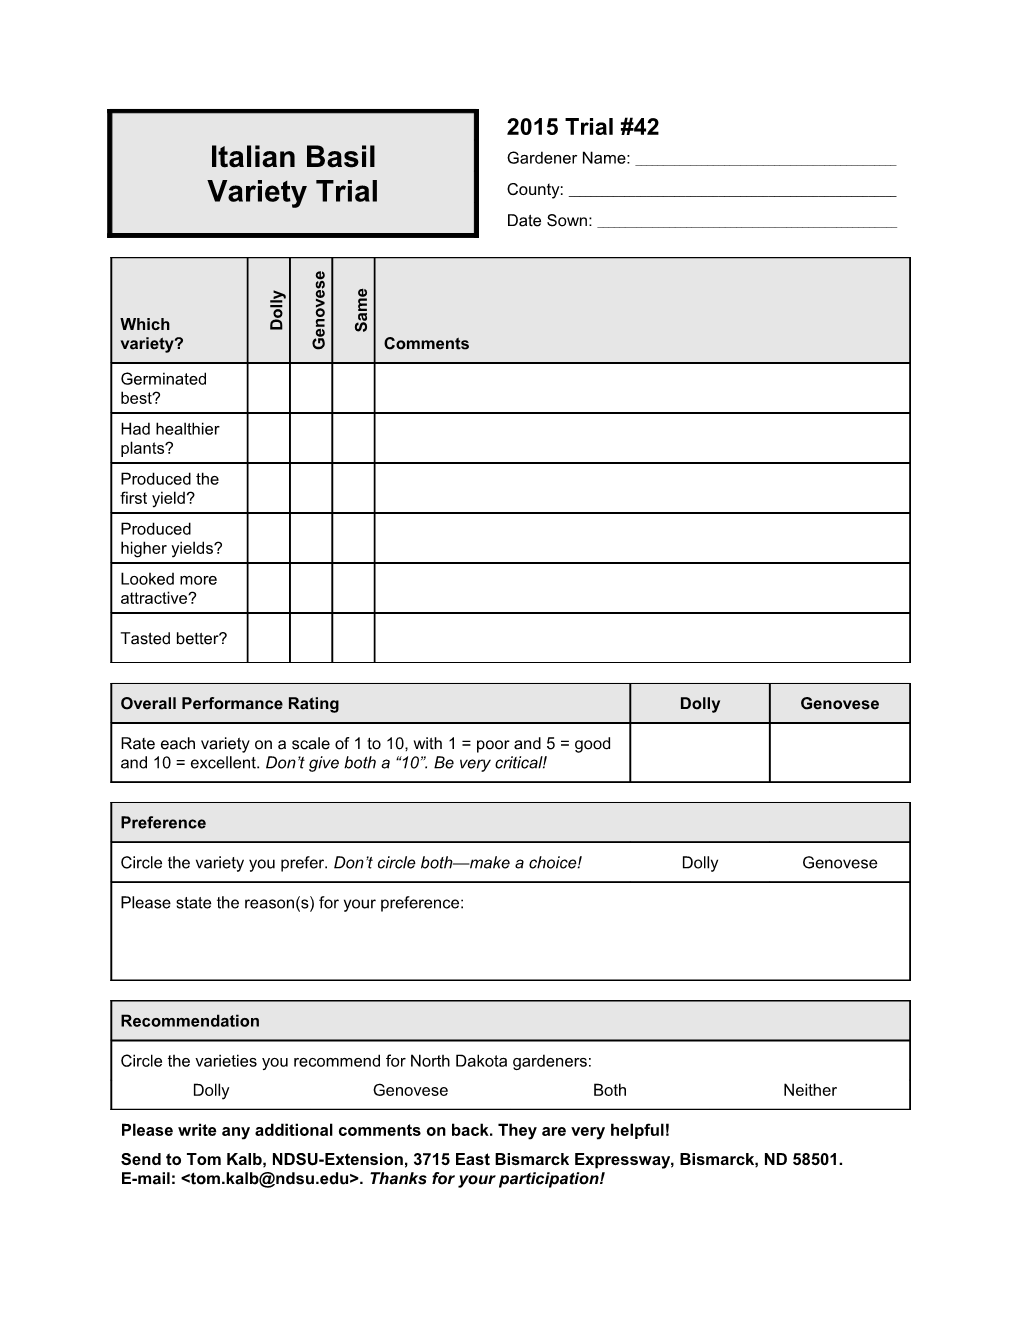 Spinach Variety Trial Evaluation Form